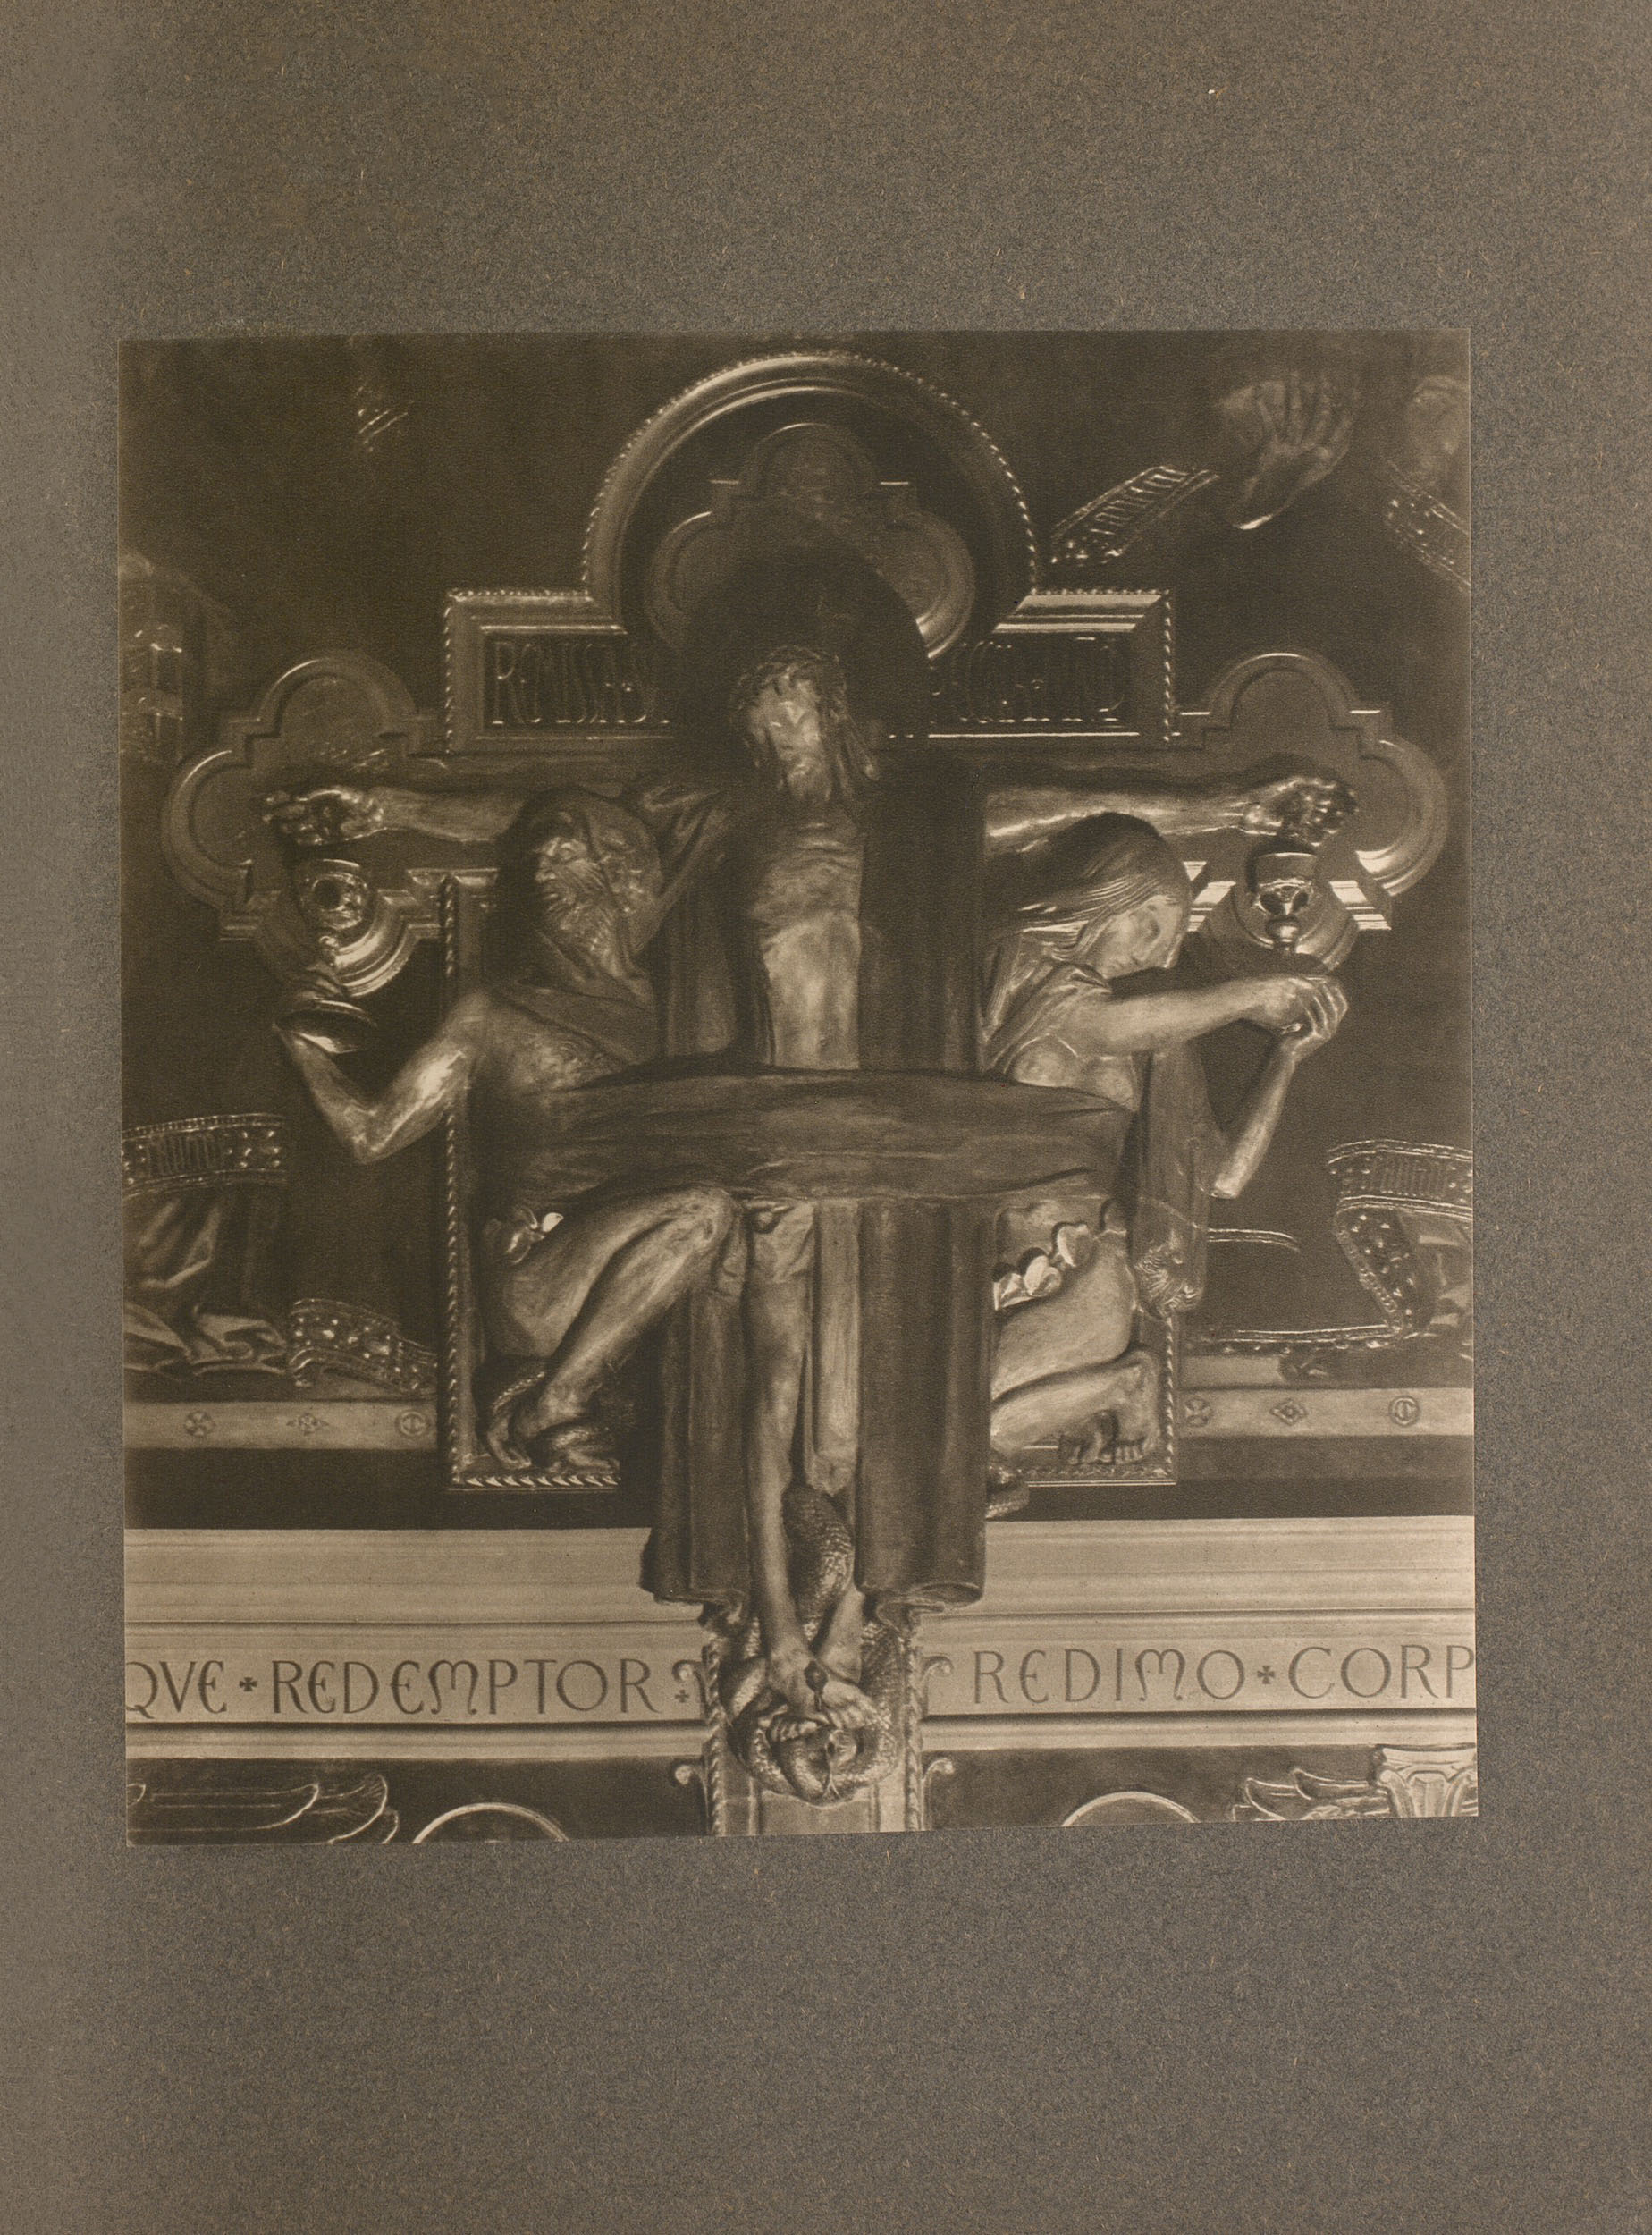 The tonal image is in portrait orientation and is located in the center of the page, tipped in on dark art paper. The photogravure of the relief sculpture presents a darkened image of the crucifixion, symbolically representing redemption by including the figures of Adam and Eve at the base of the cross. Christ is on the cross, with his head tilted downward, toward Adam and Eve on either side of him below.. There is a dark garment around the back of Christ’s’ neck that rests on either side of his body. Another dark garment is wrapped around Christ’s waist, binding him to Adam and Eve. On the left, Adam is crouched by the foot of the cross, with a serpent around his feet; he holds a chalice up to Christ to catch his blood. Eve is crouched at the foot of the cross on the right of Christ, wearing a belt made out of leaves and holding a chalice up to catch Christ’s blood. Below the image on the wall behind it is the Latin inscription: “AVE, REDEMPTOR, REDIMO, CORP.”